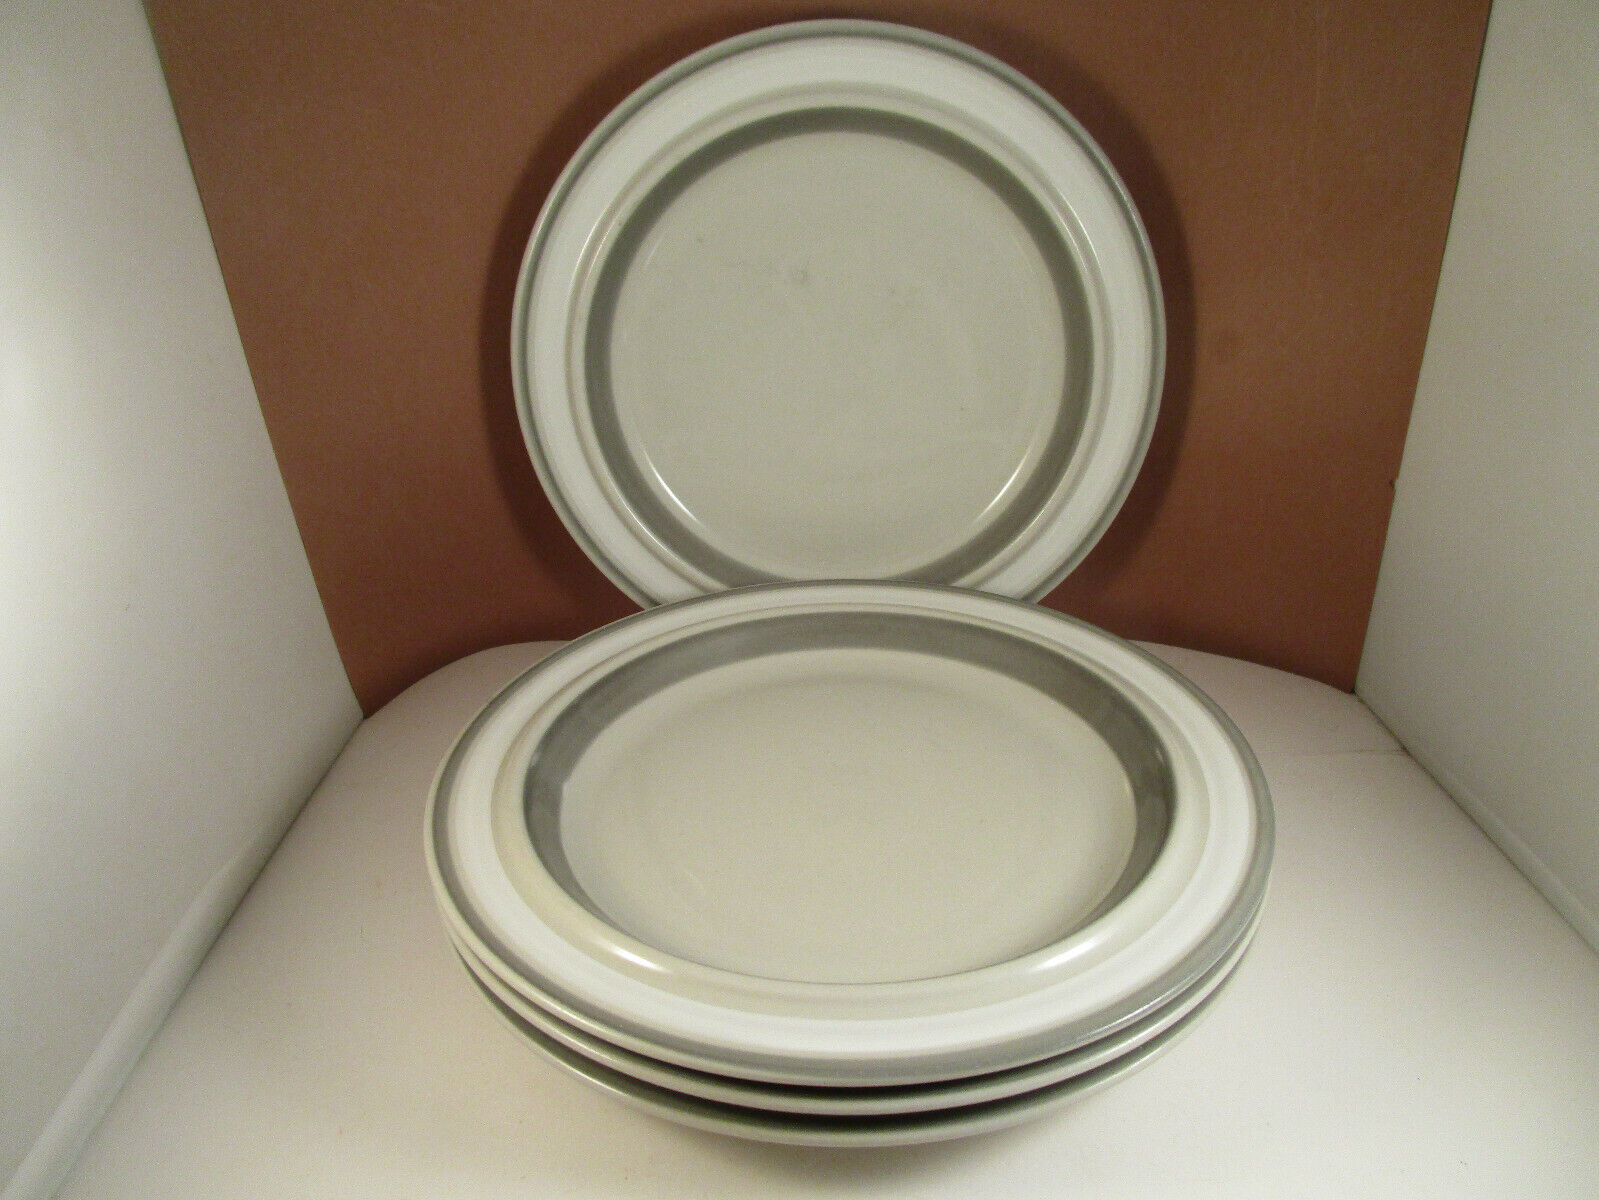 Read more about the article Vintage Arabia Finland Salla Set of 4 Dinner Plates A